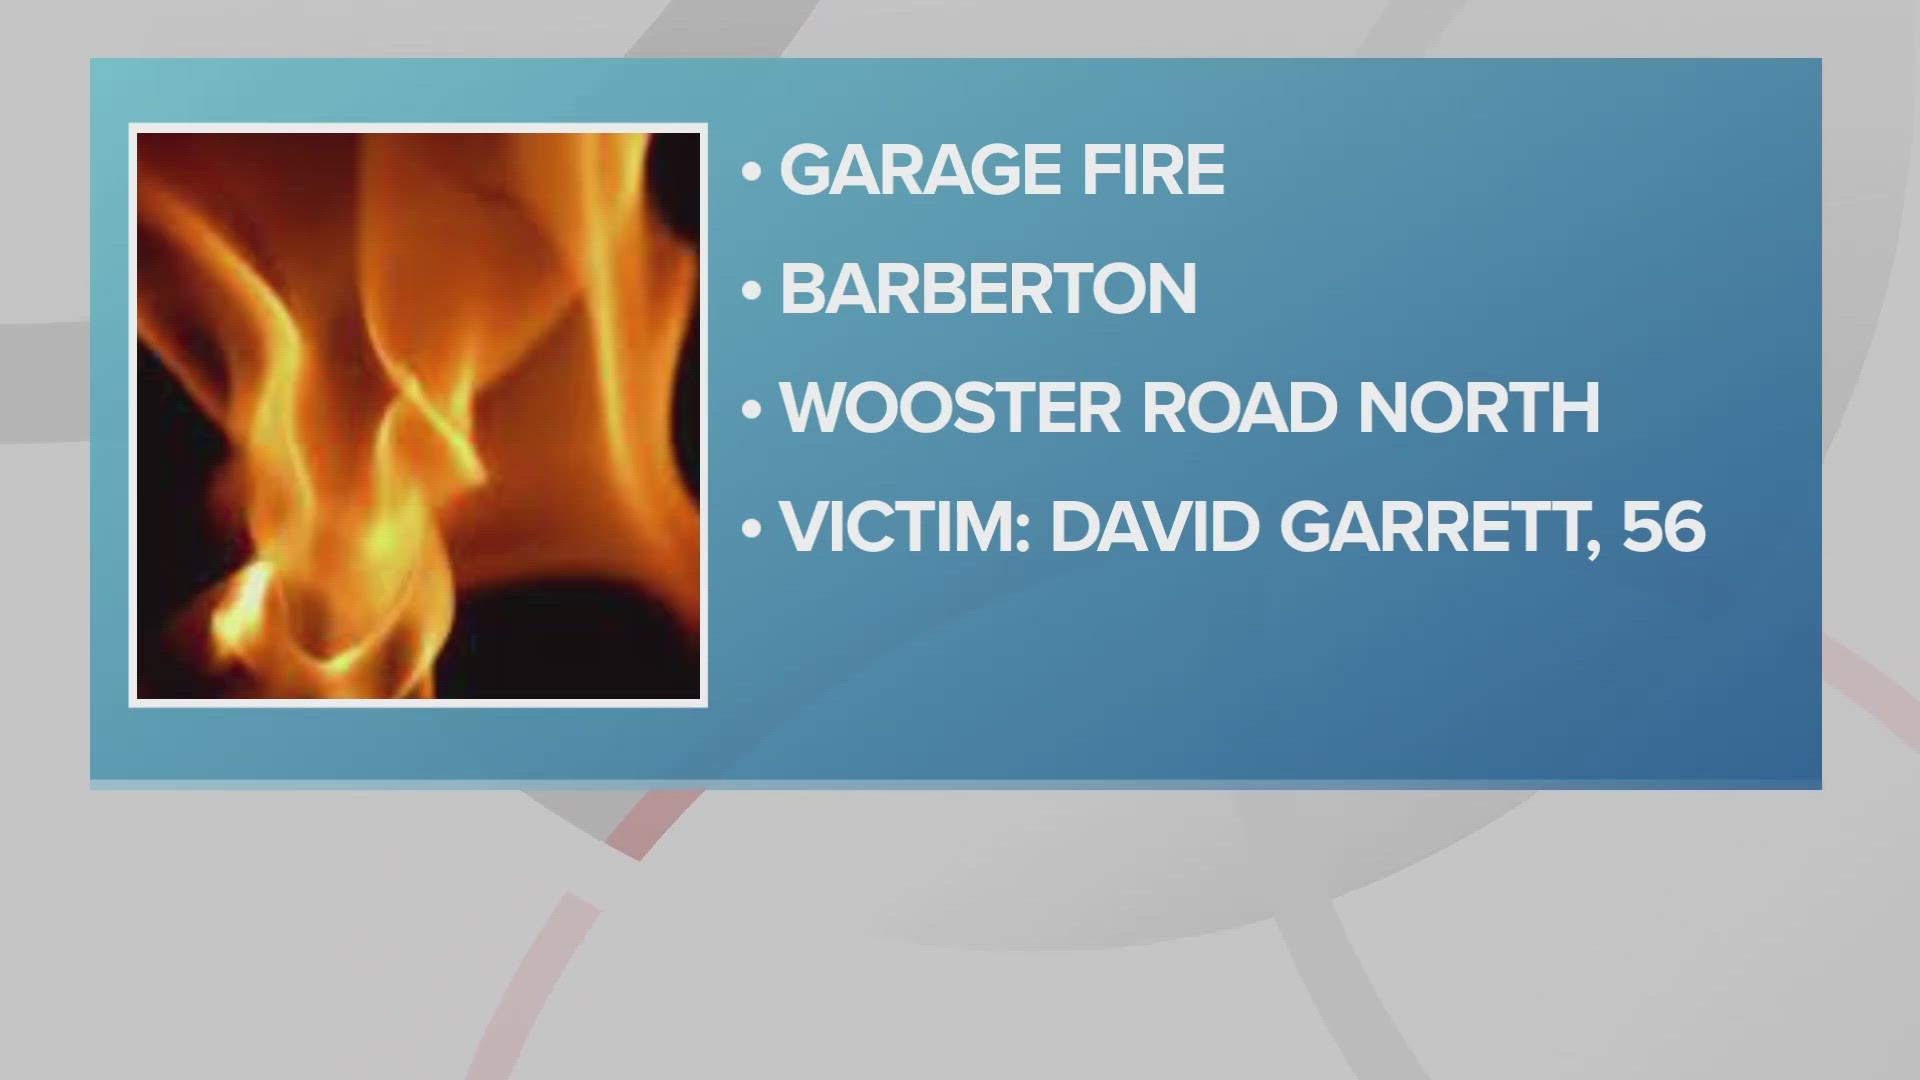 The fire took the life of 56-year-old David Garrett. The cause of the fire on Wooster Road North is under investigation.